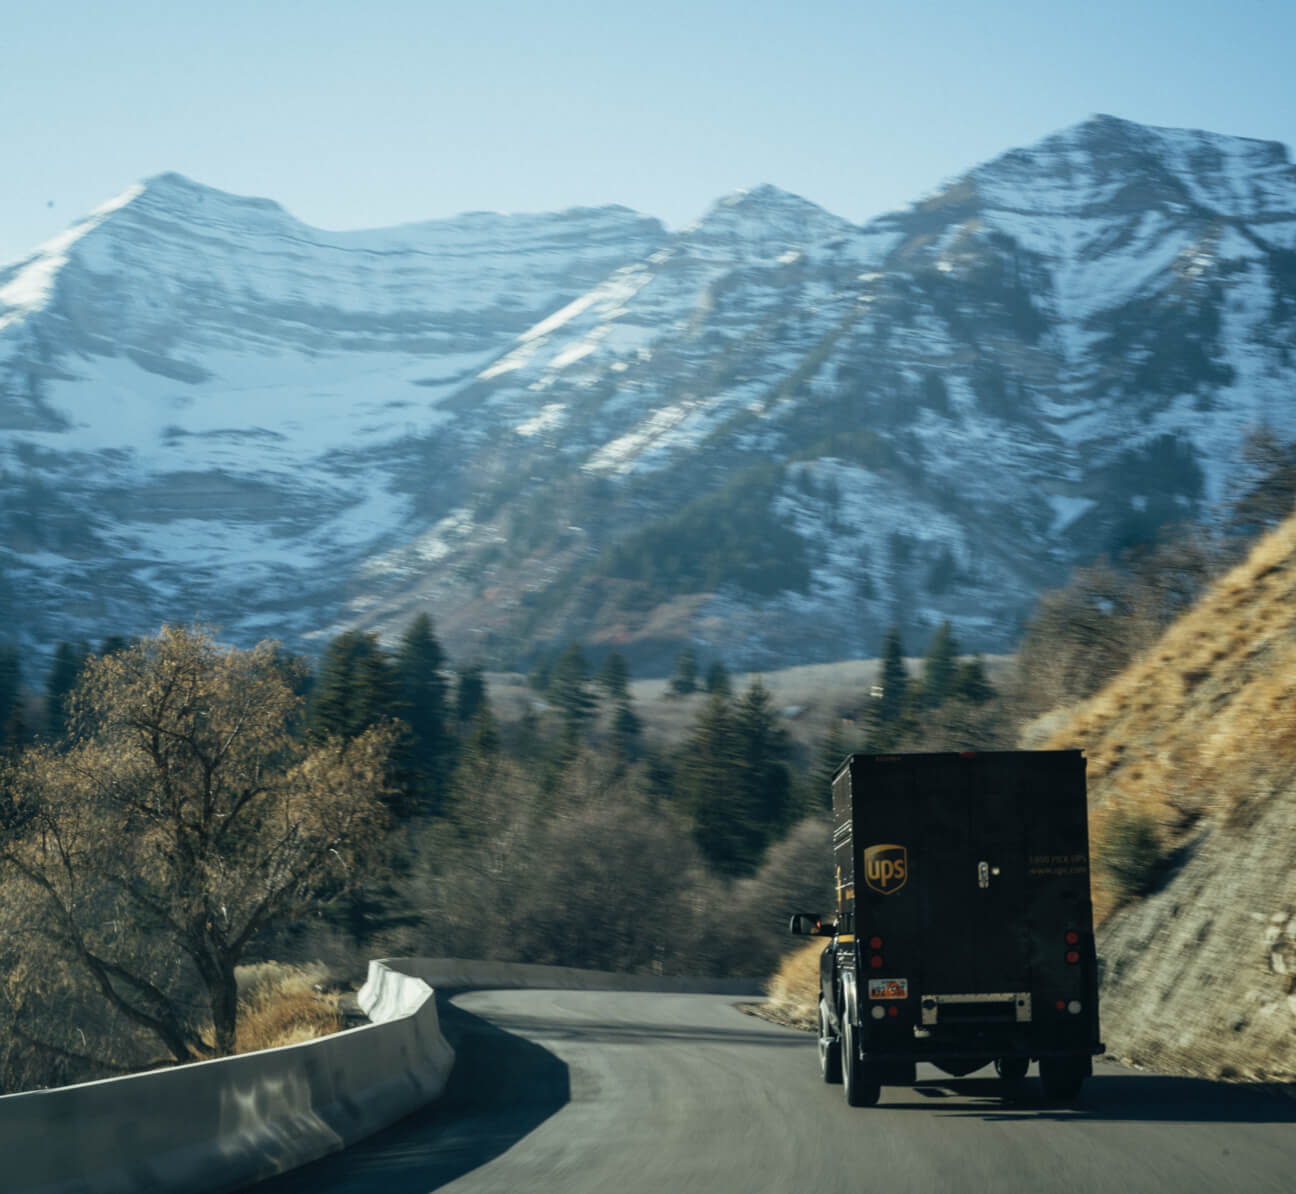 UPS Delivery Truck driving on road with mountains in background